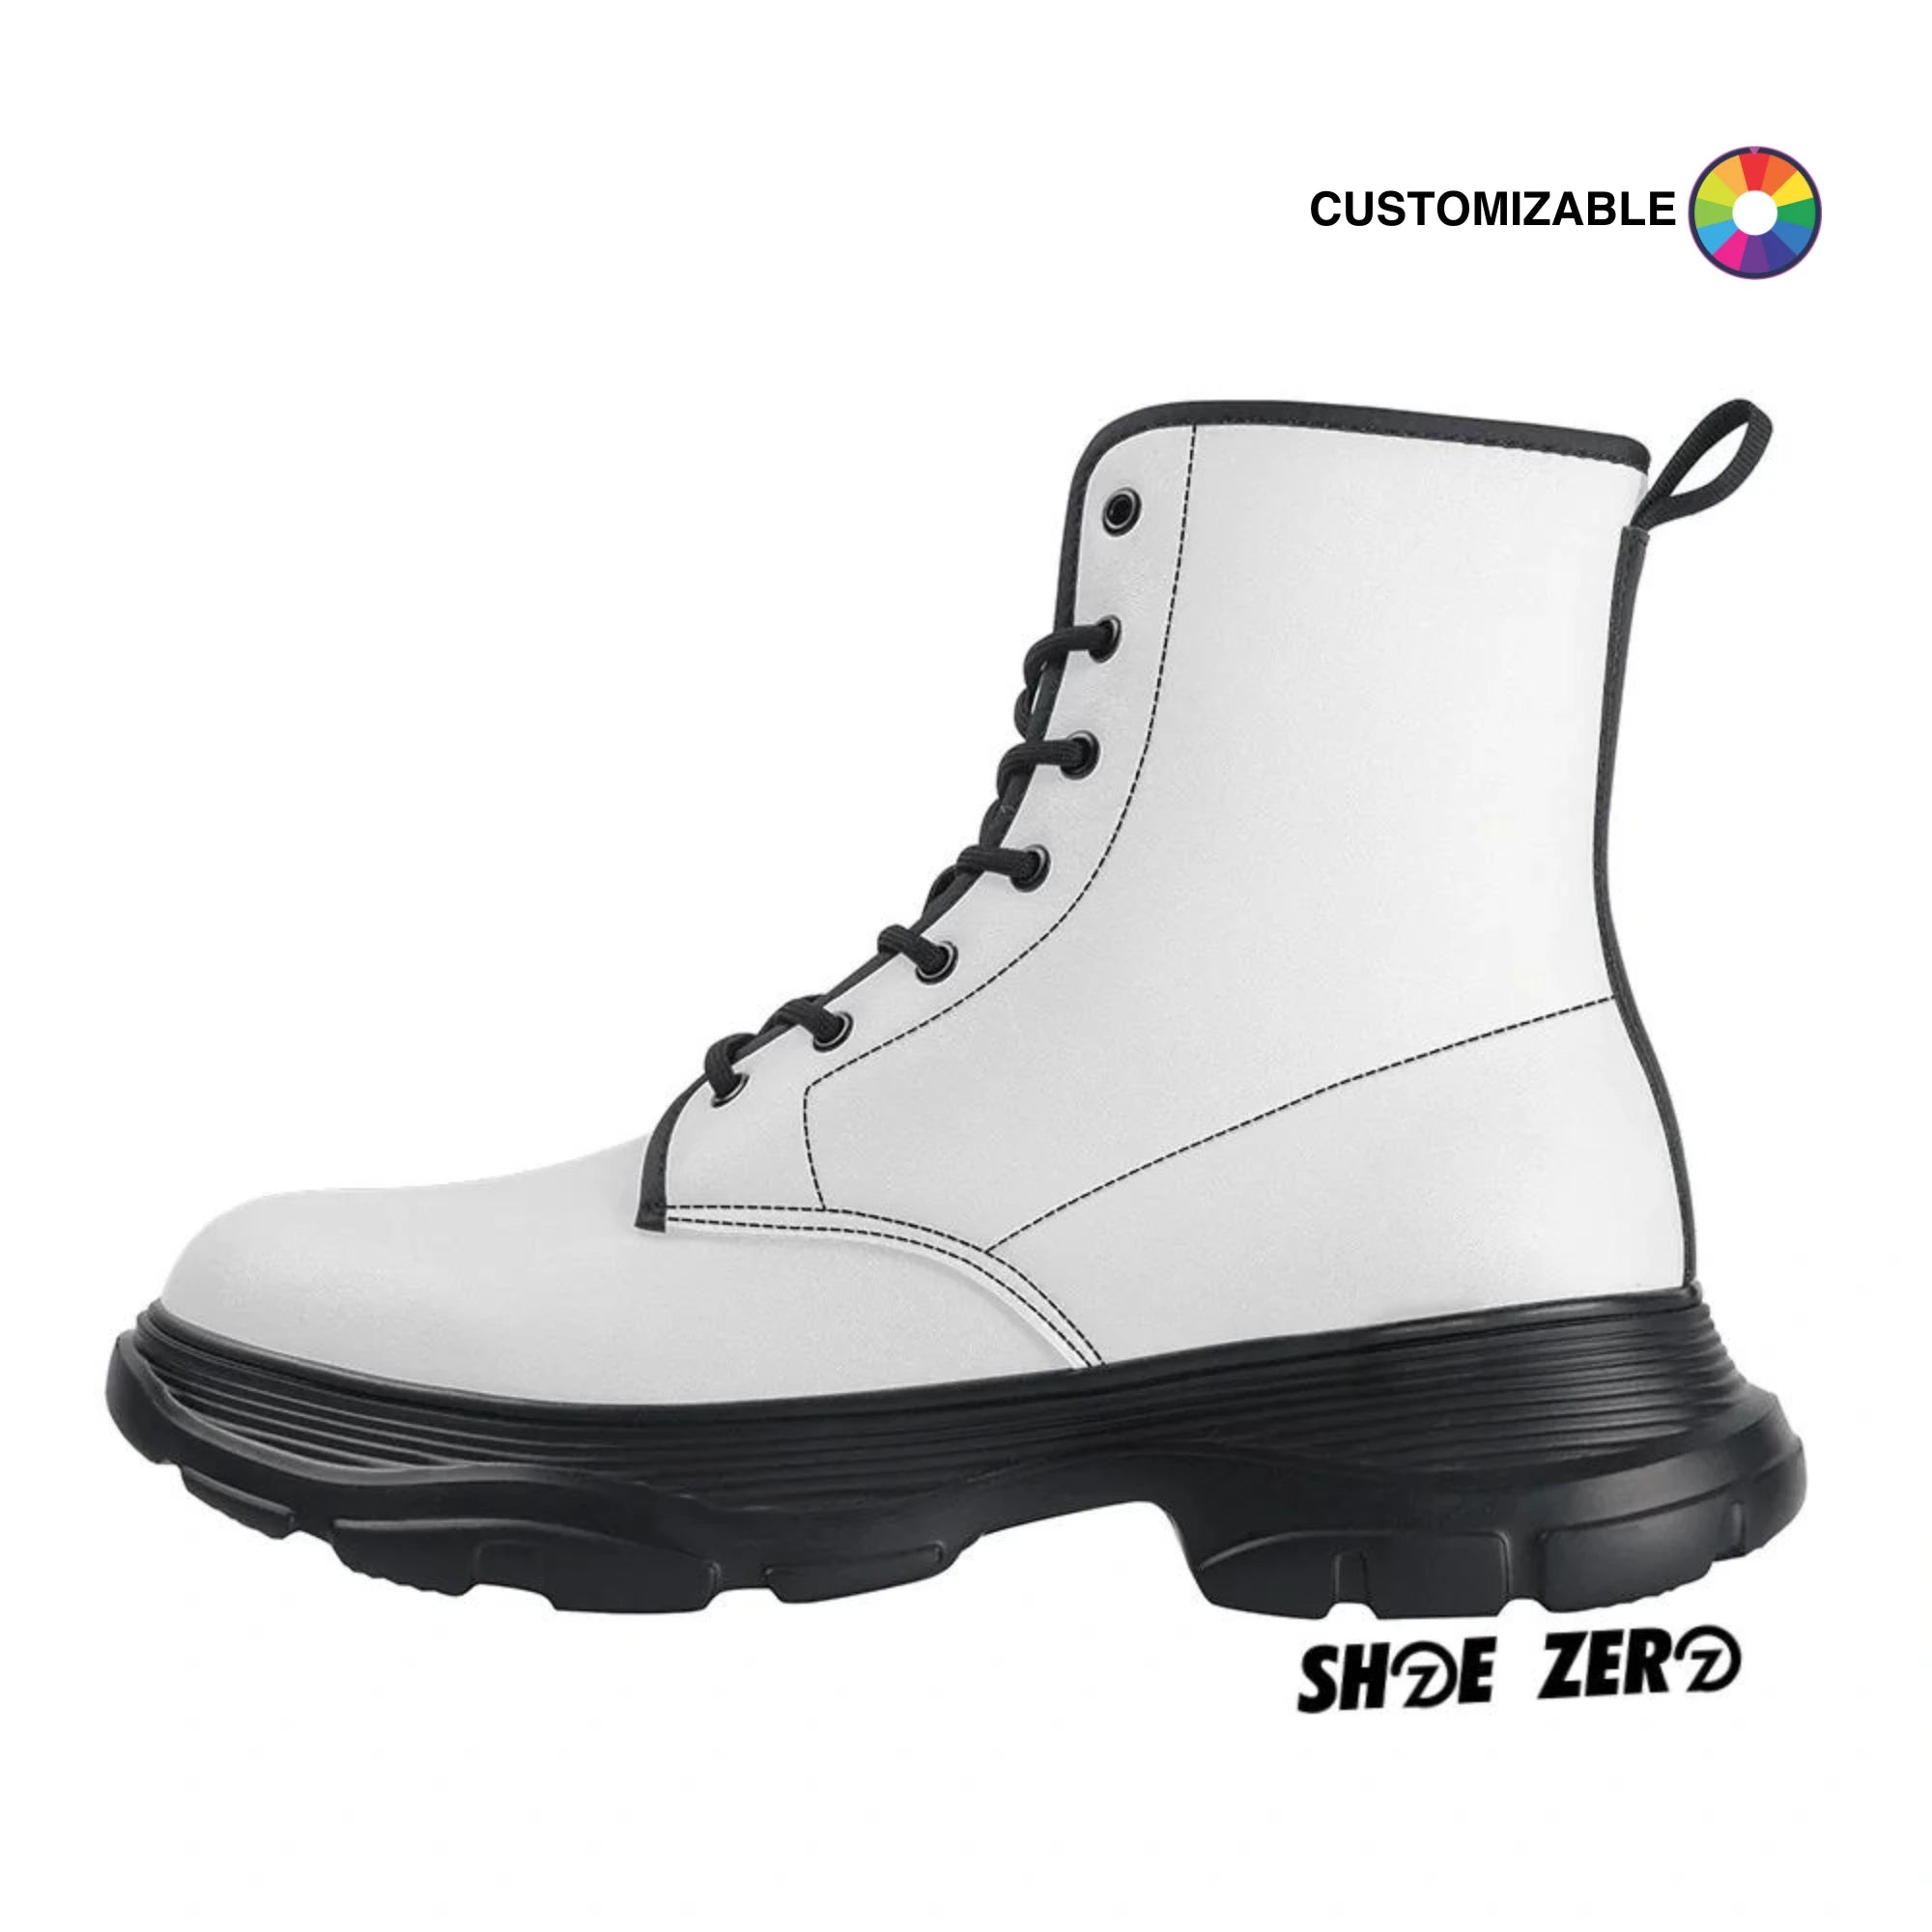 Customizable Leather Chunky Boots | Design your own | Shoe Zero